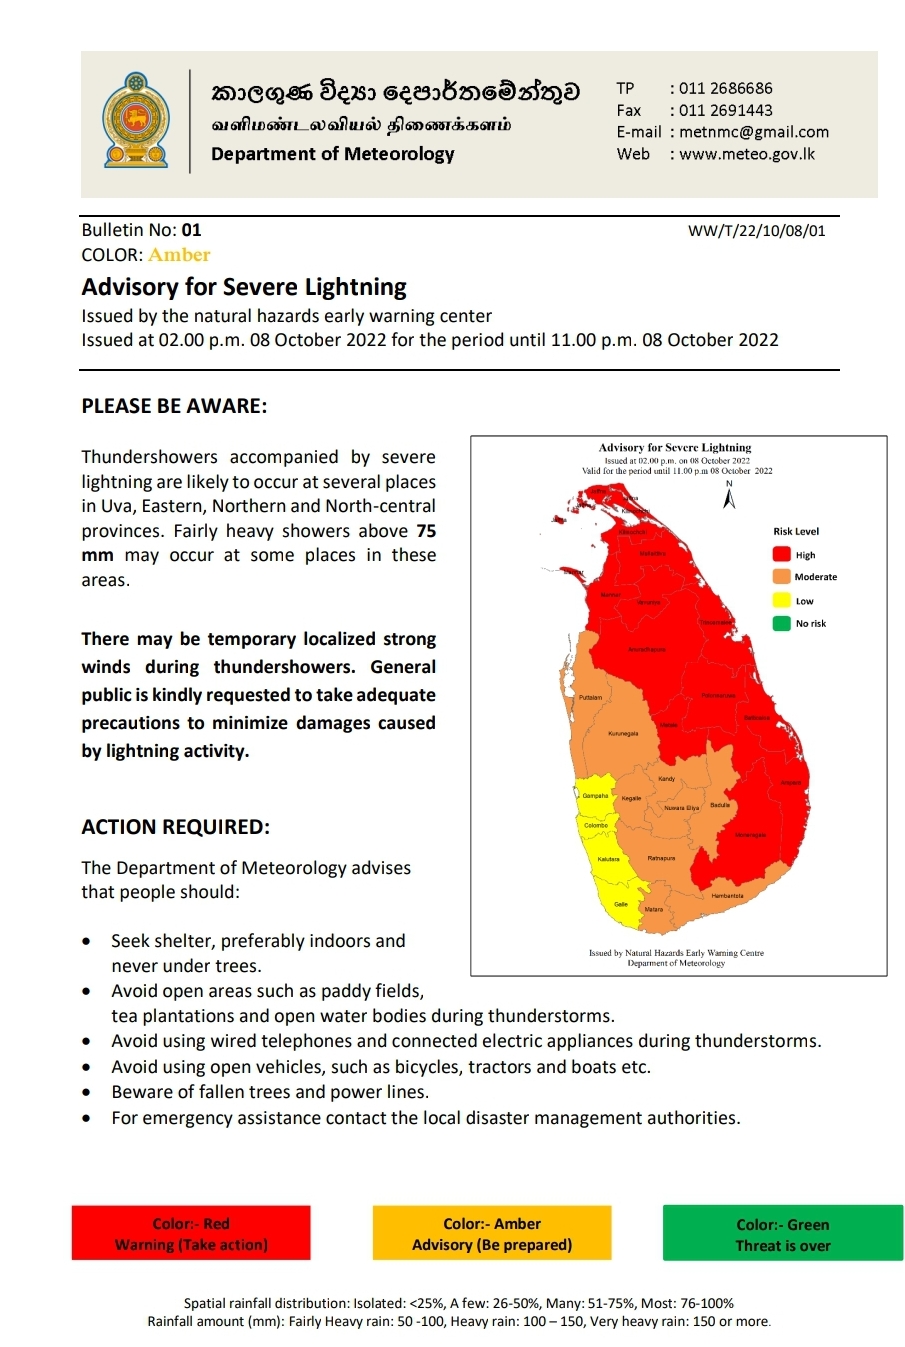 Severe lightning warning issued for 12 districts